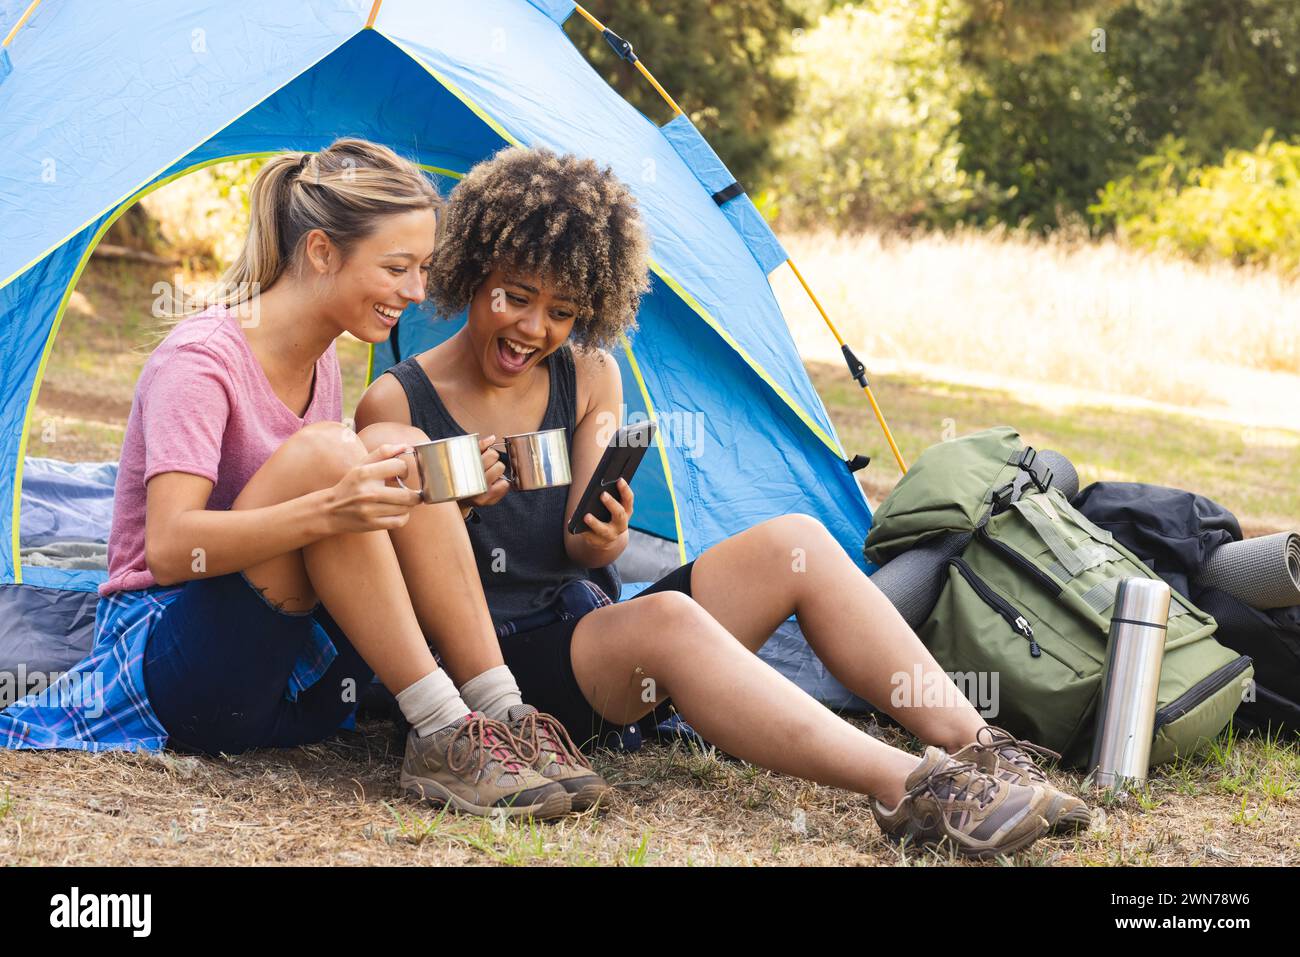 Young Caucasian woman and biracial woman share a laugh outside a tent Stock Photo